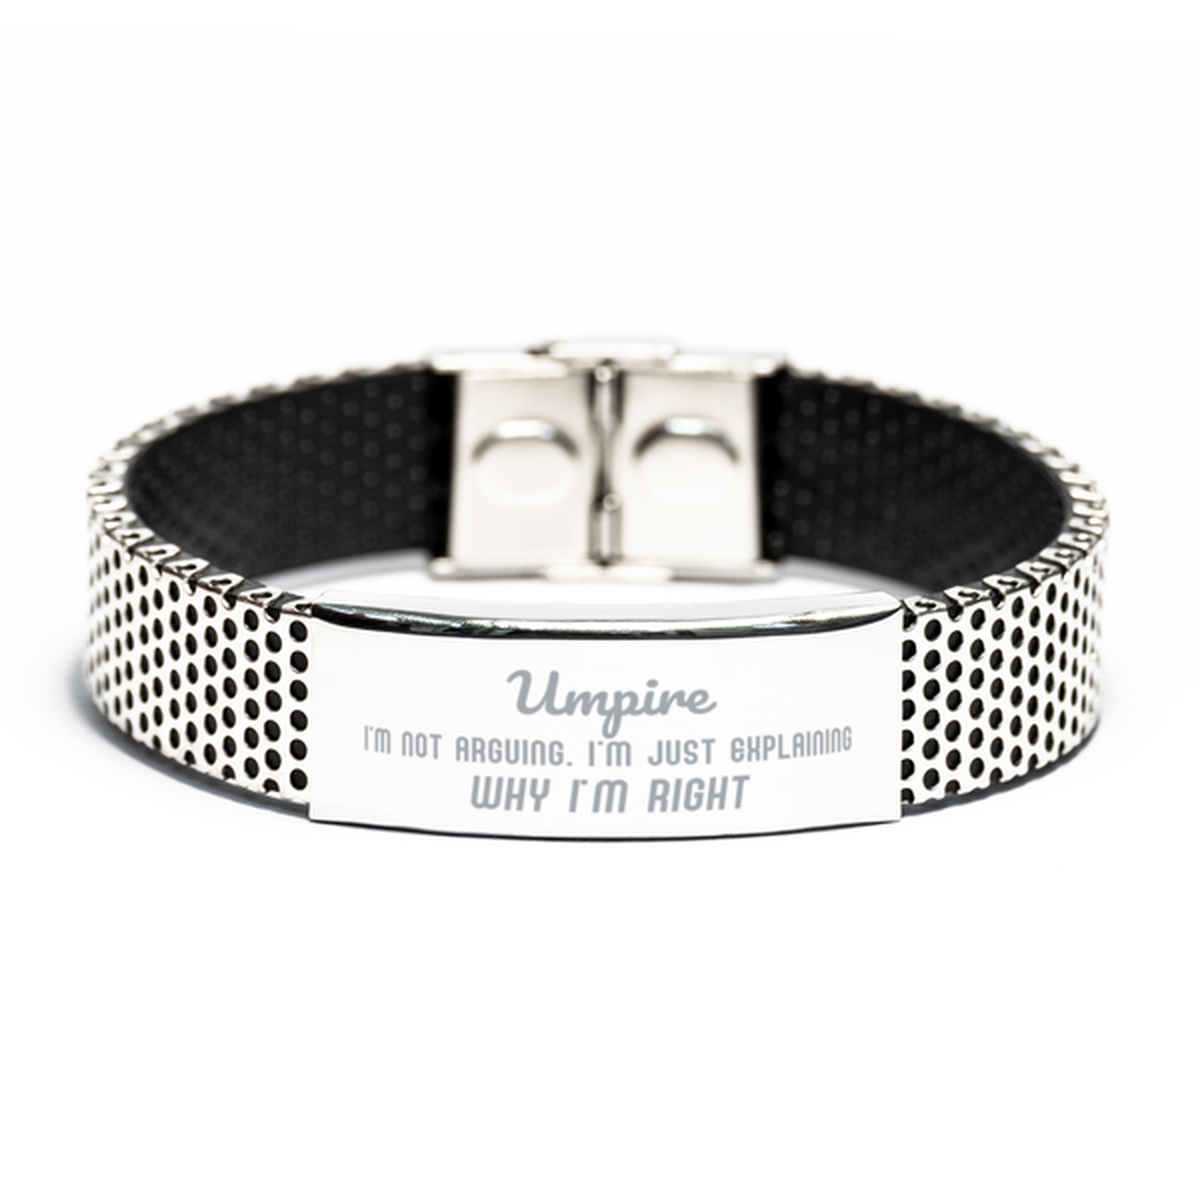 Umpire I'm not Arguing. I'm Just Explaining Why I'm RIGHT Stainless Steel Bracelet, Funny Saying Quote Umpire Gifts For Umpire Graduation Birthday Christmas Gifts for Men Women Coworker